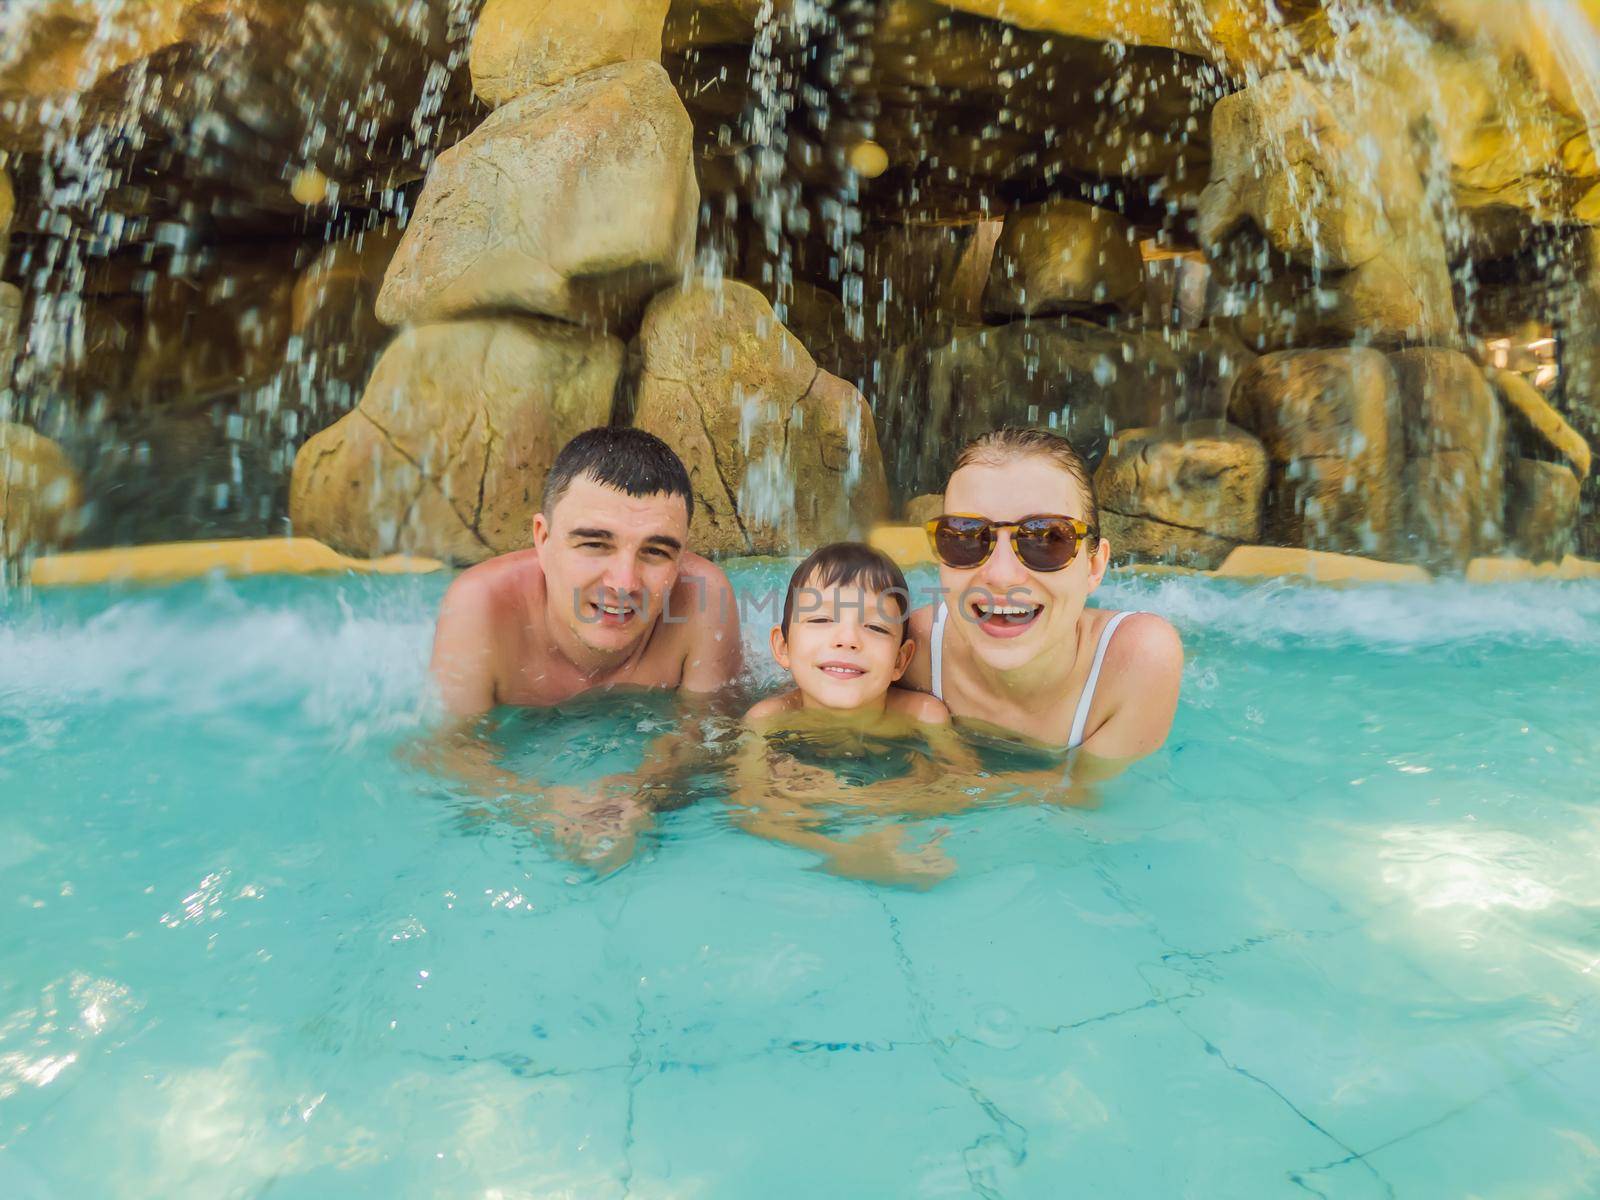 Happy family on holidays swimming with fun in waterfall pool. Active lifestyle, people outdoor travel activity on summer vacation on tropical island by galitskaya